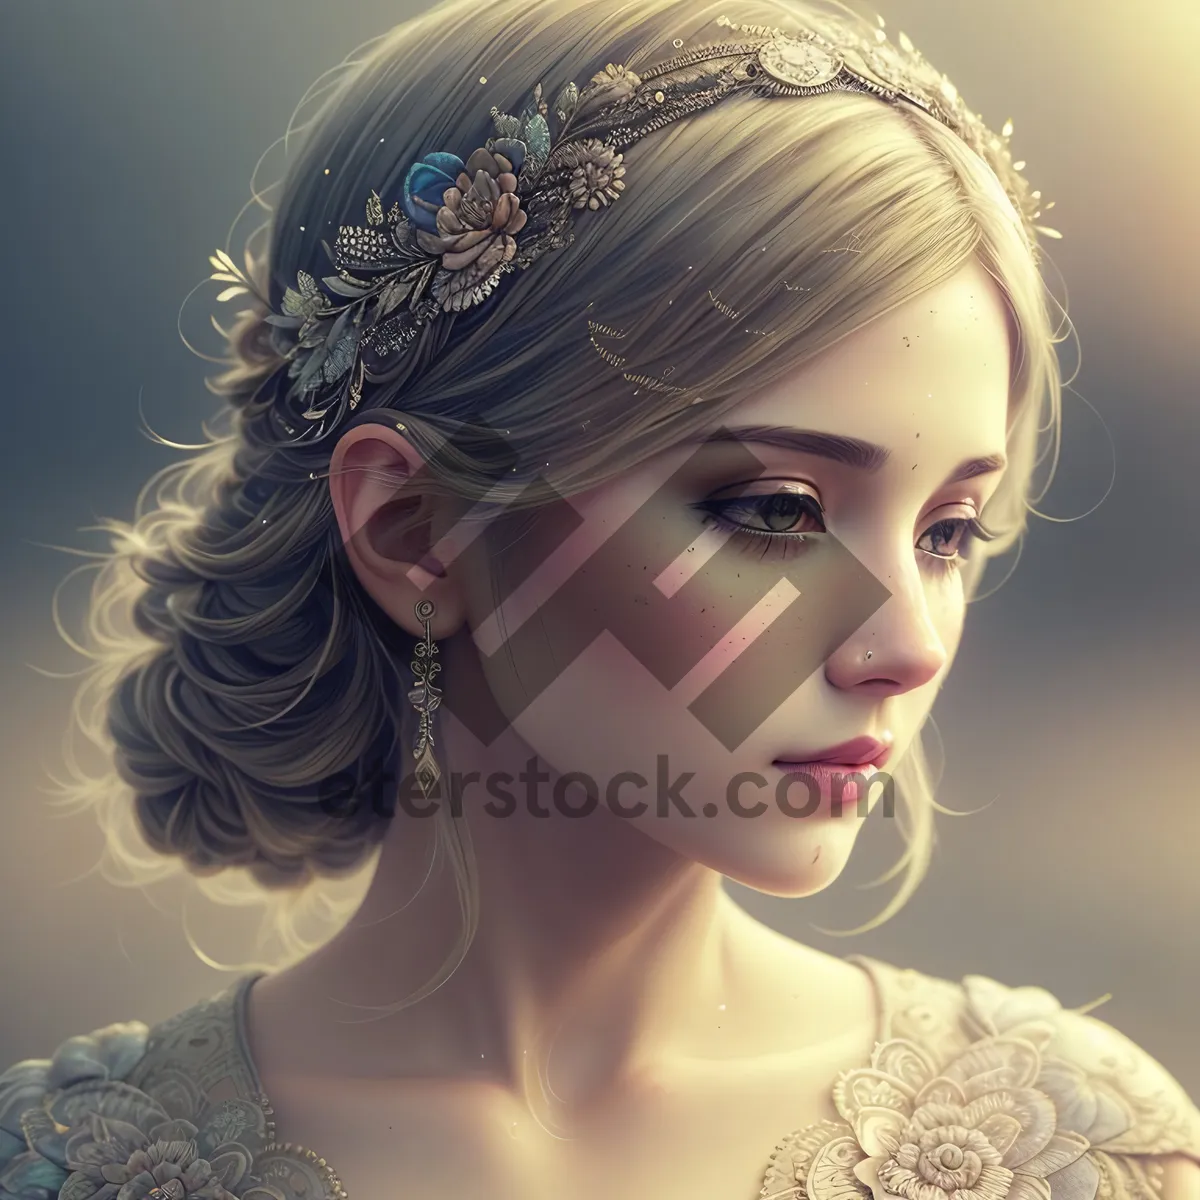 Picture of Exquisite Beauty: Sensual Doll with Crown Jewels